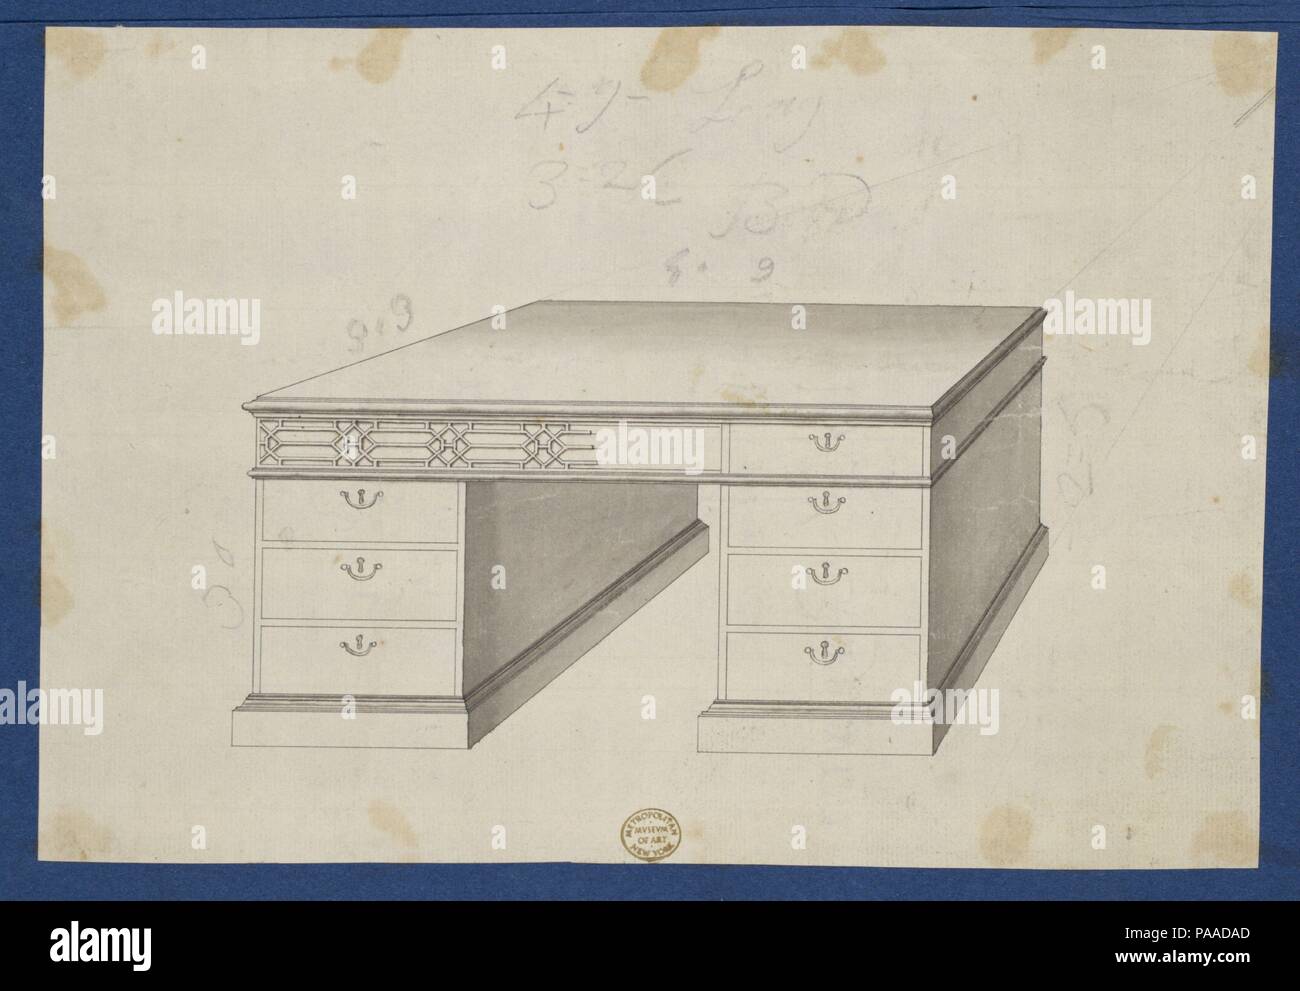 Library Table, from Chippendale Drawings, Vol. II. Artist: Thomas Chippendale (British, baptised Otley, West Yorkshire 1718-1779 London). Dimensions: sheet: 7 1/16 x 10 1/4 in. (17.9 x 26.1 cm). Date: ca. 1753-62.  Design for a library table. Not published in Thomas Chippendale's 'Gentleman and Cabinet Maker's Director'. Museum: Metropolitan Museum of Art, New York, USA. Stock Photo